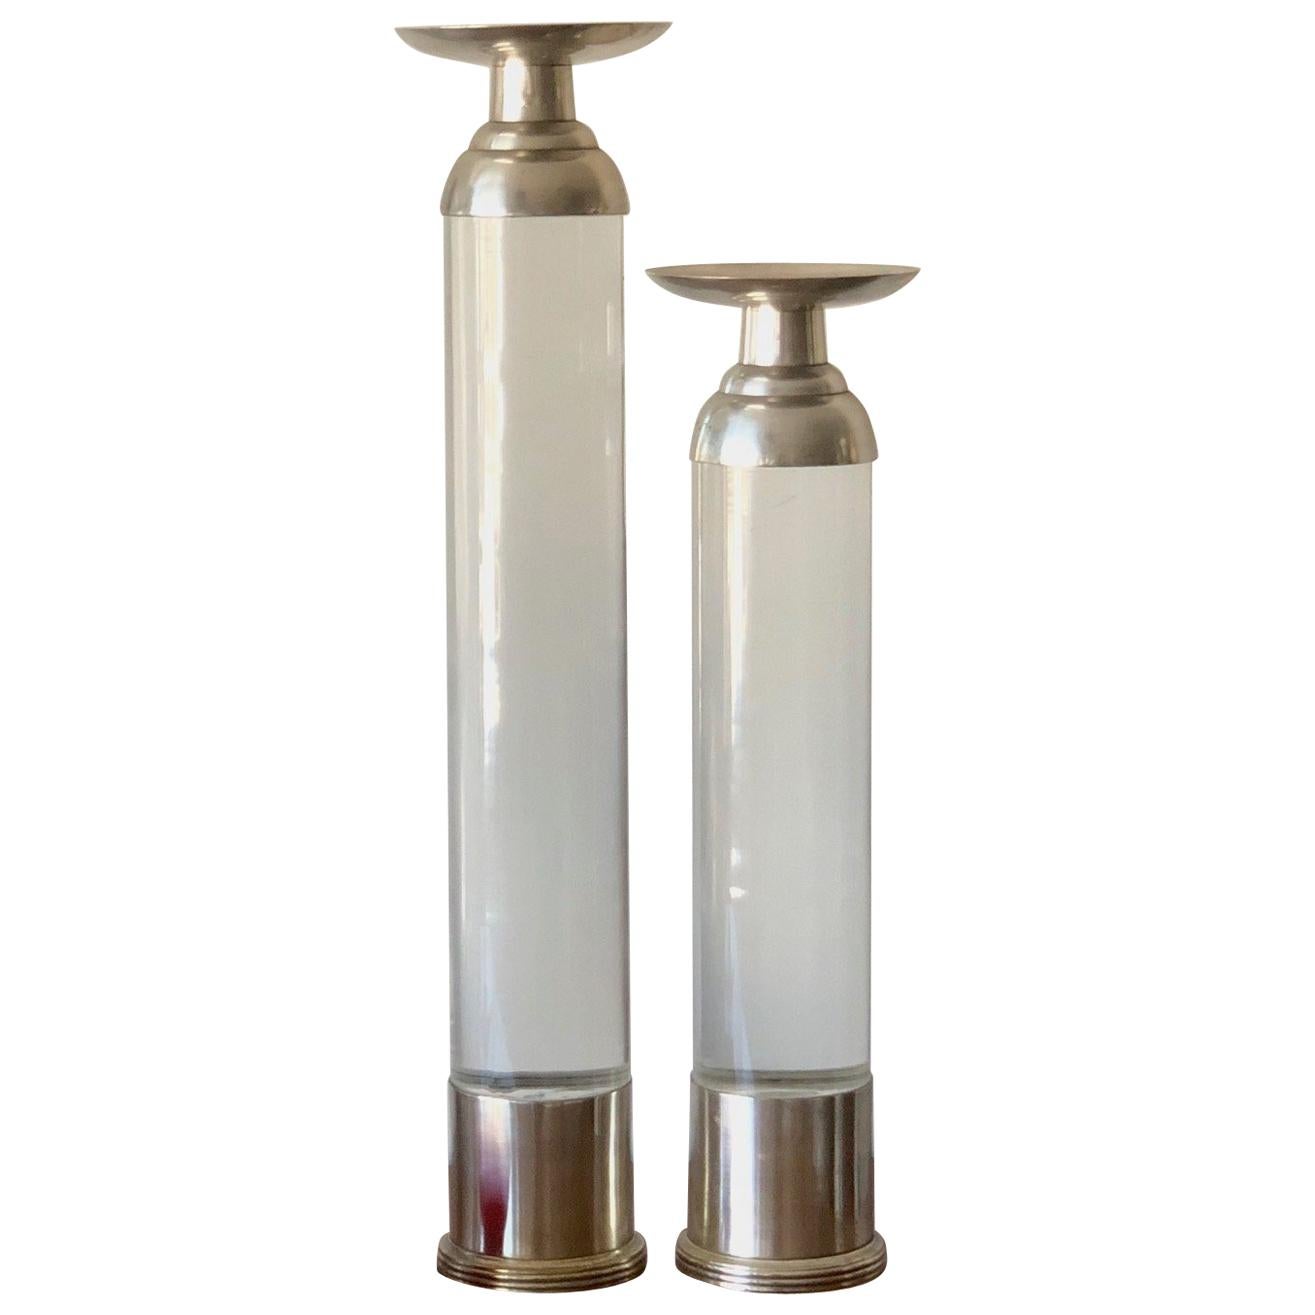 Two Lucite Candlesticks